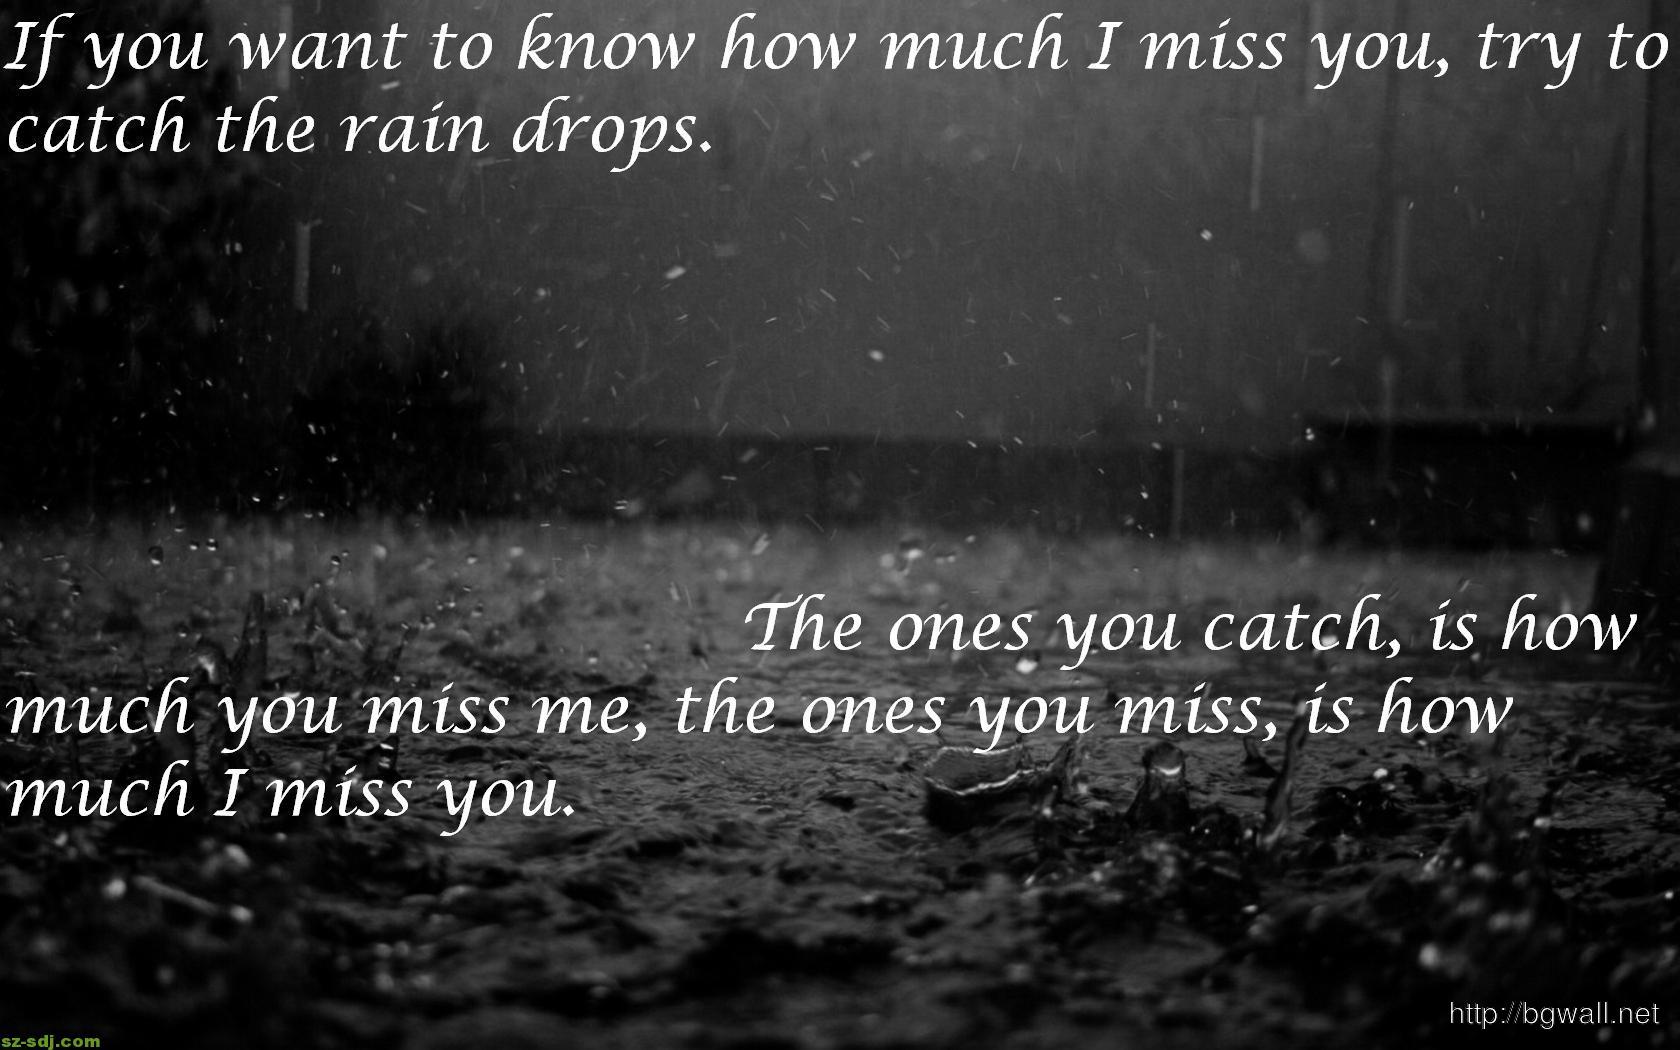 Missing You On Rainy Days Quotes - HD Wallpaper 